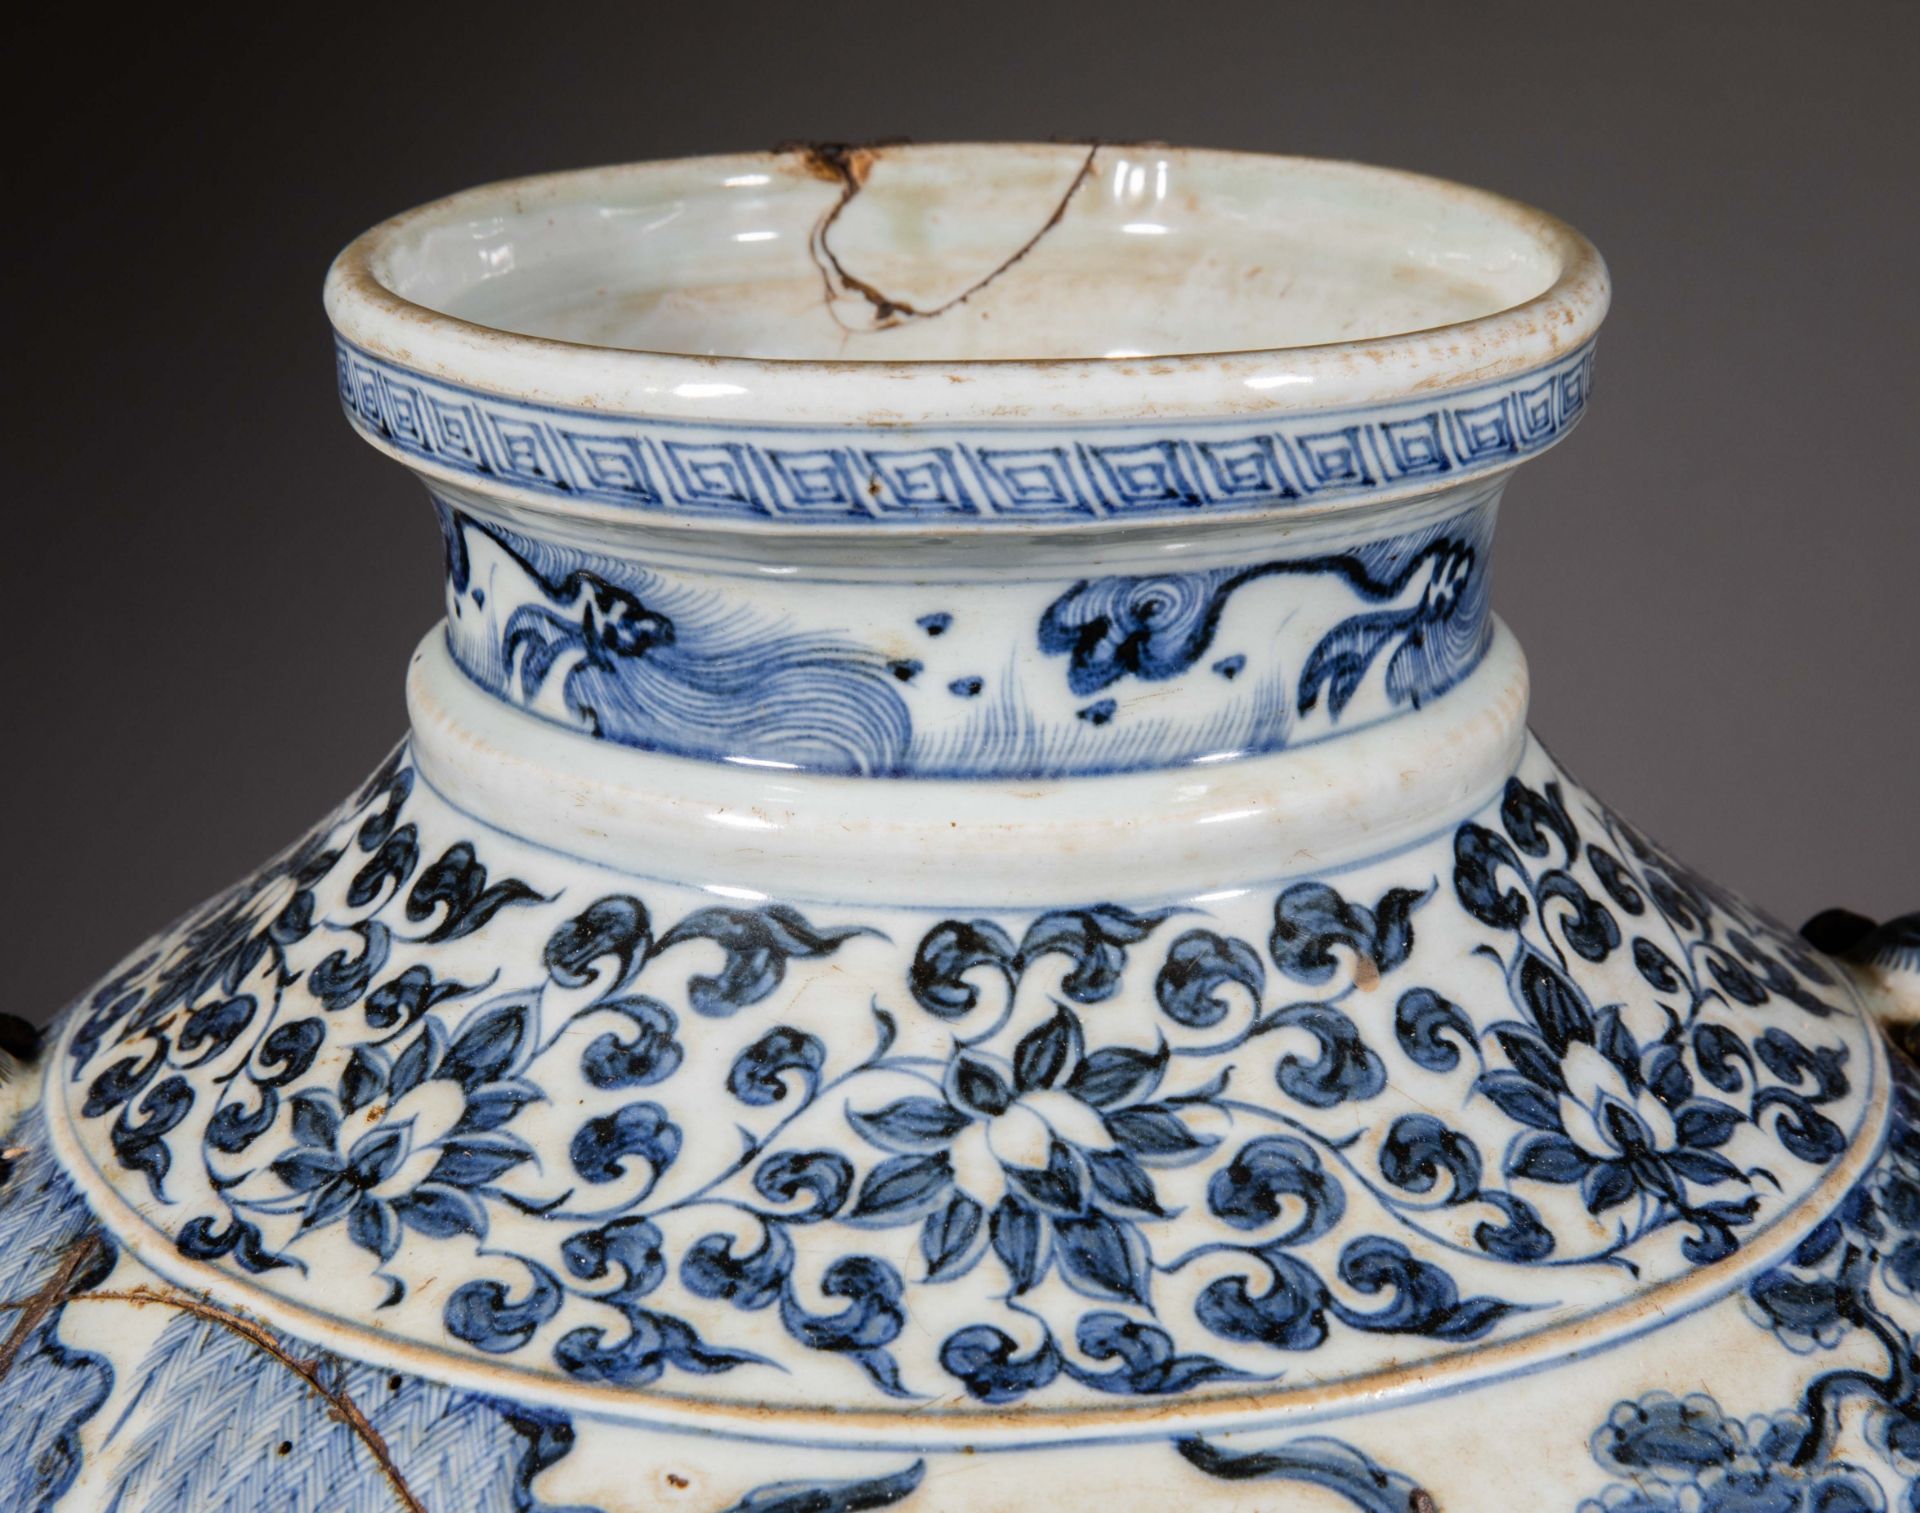 Blue and white porcelain vase from Yuan Dynasty - Image 4 of 9